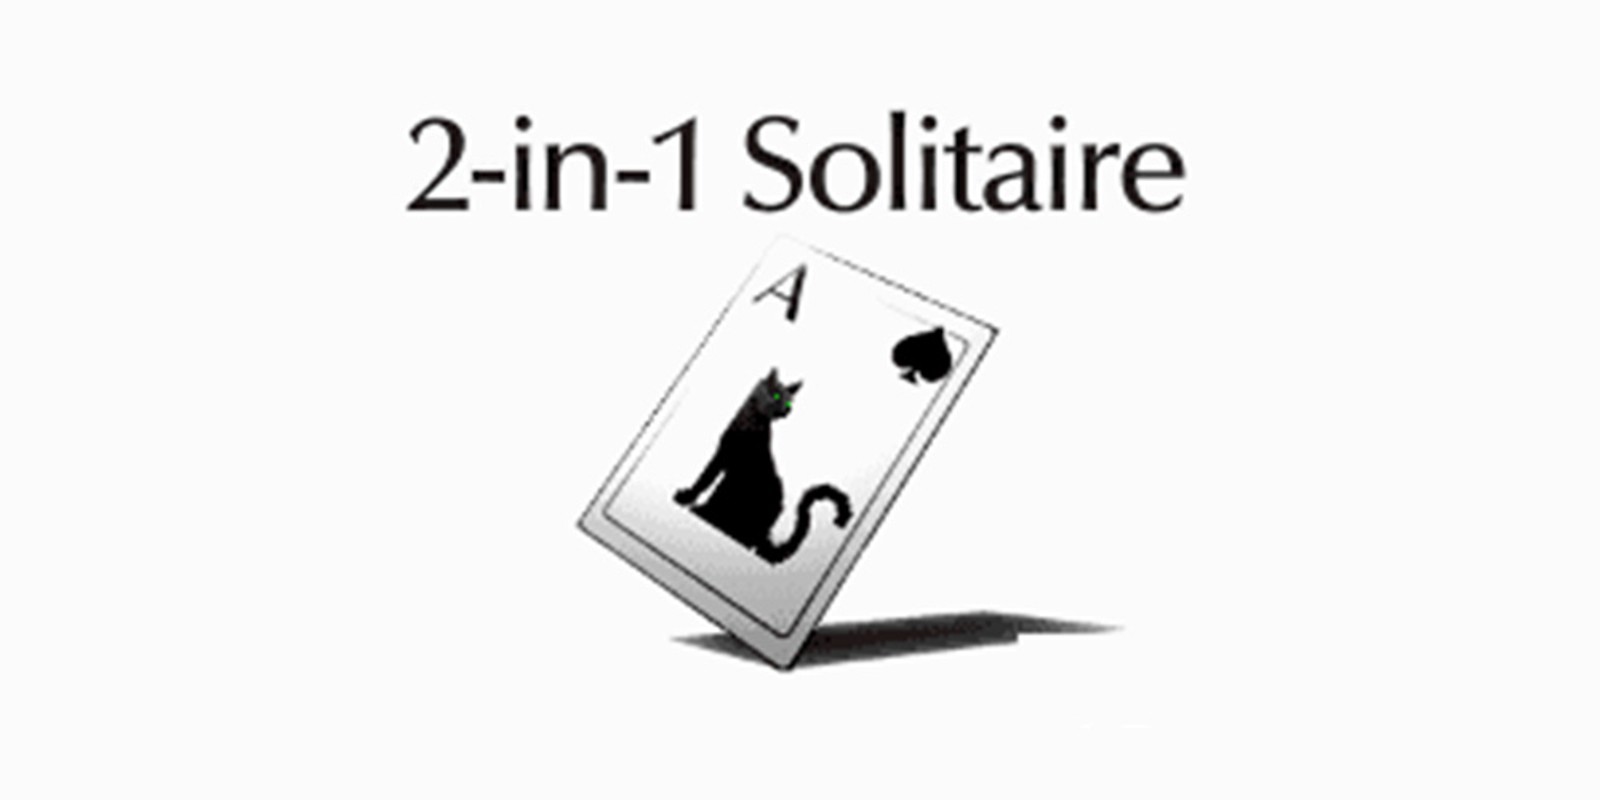 2-in-1 Solitaire